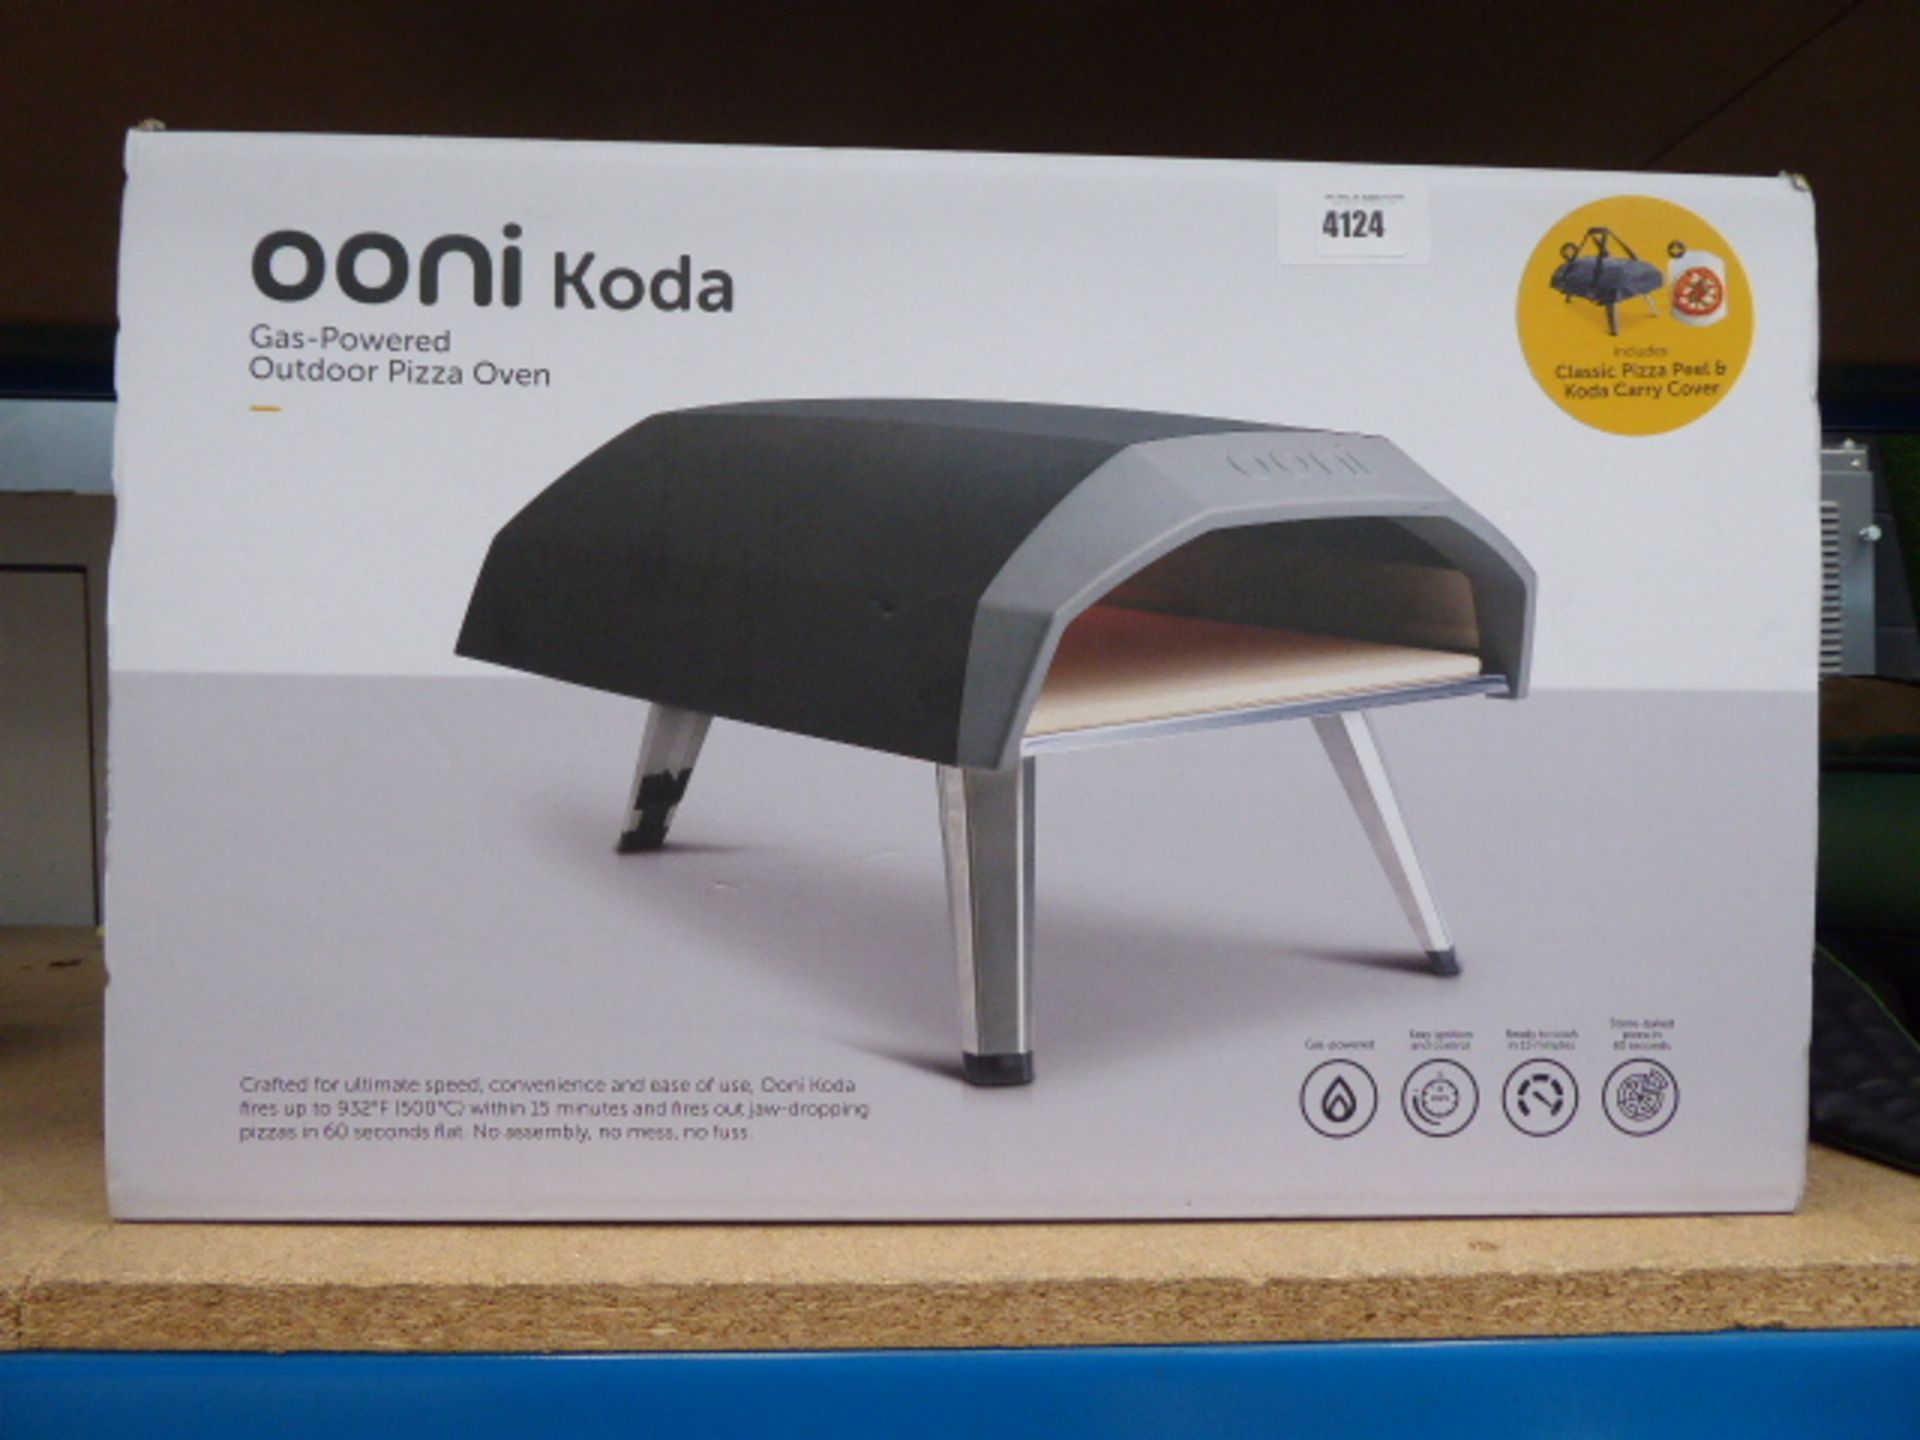 Ooni Koda gas powered outdoor pizza oven, boxed